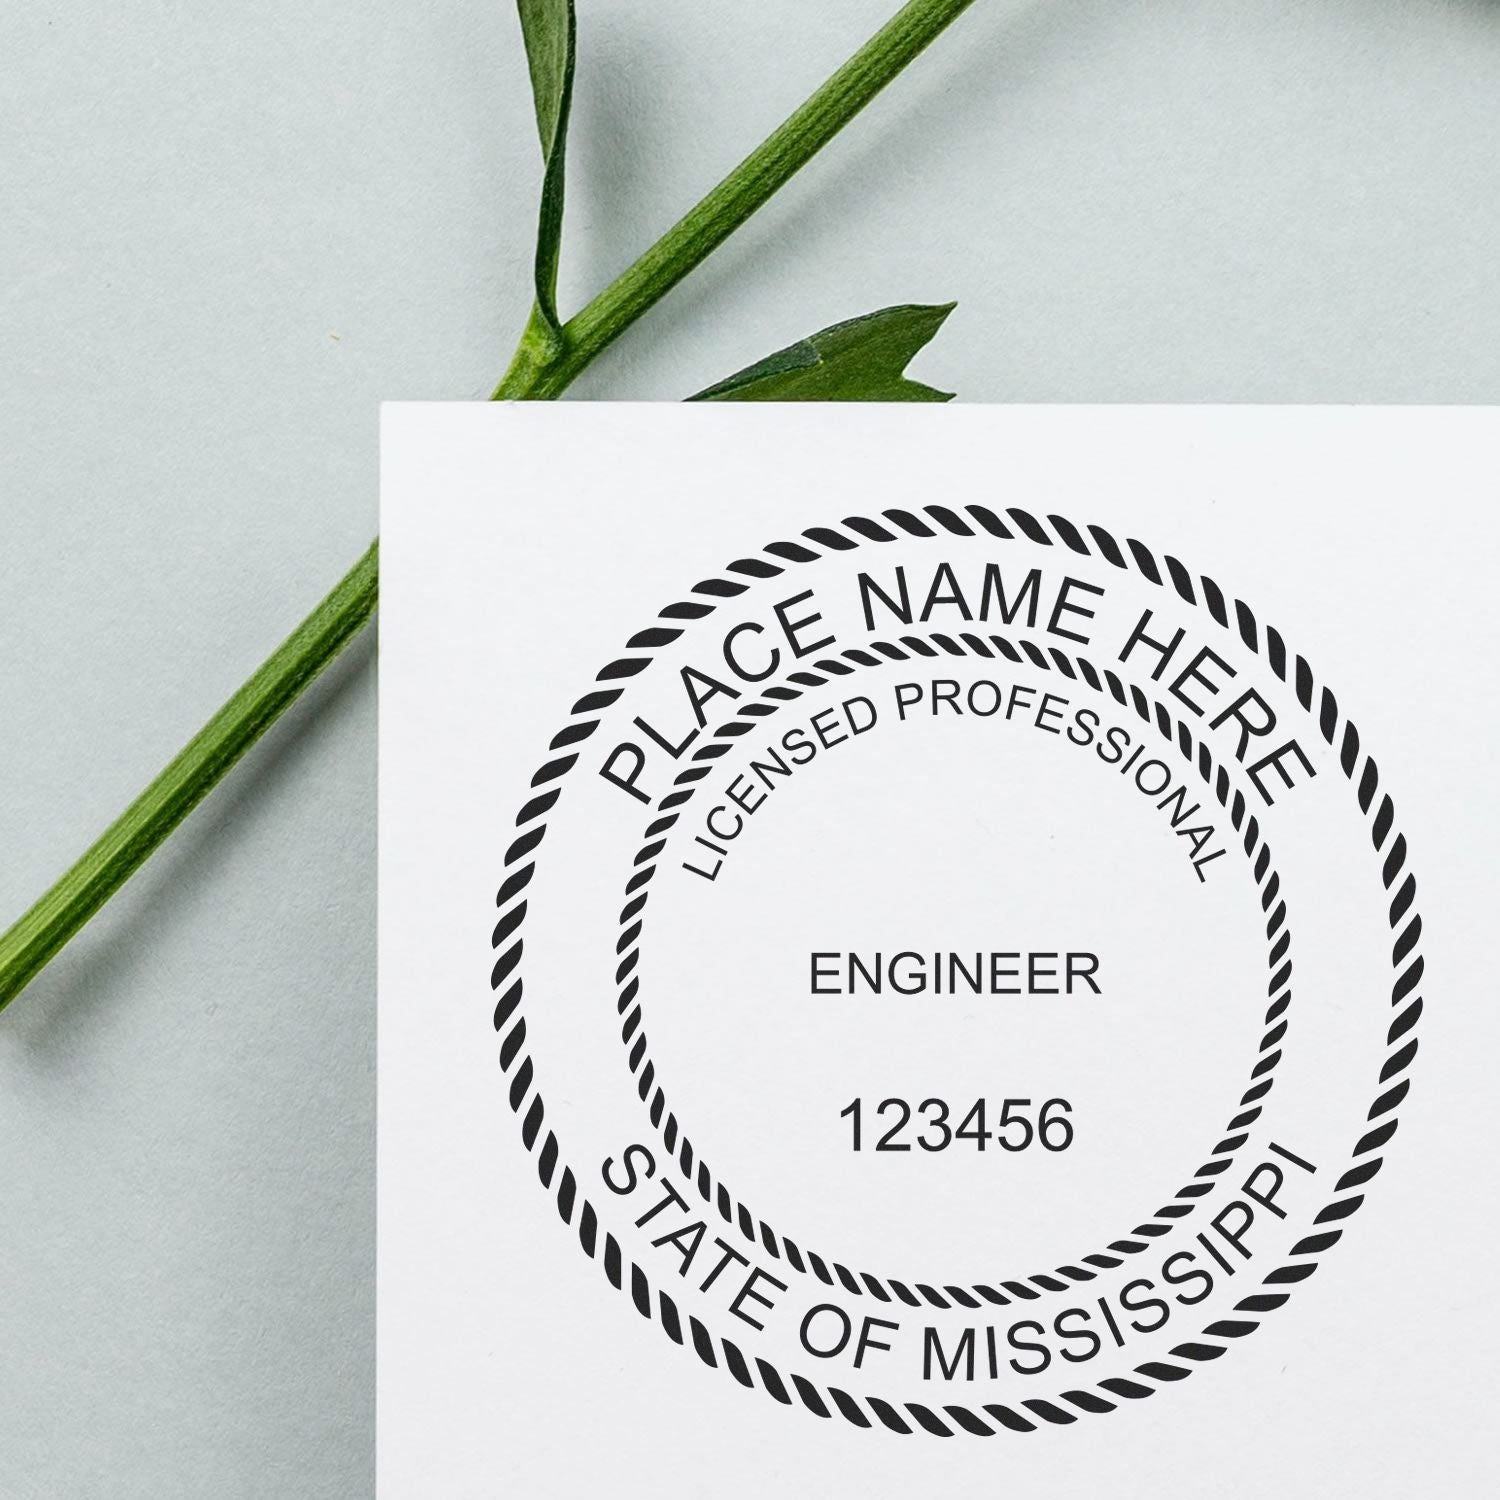 Another Example of a stamped impression of the Mississippi Professional Engineer Seal Stamp on a piece of office paper.